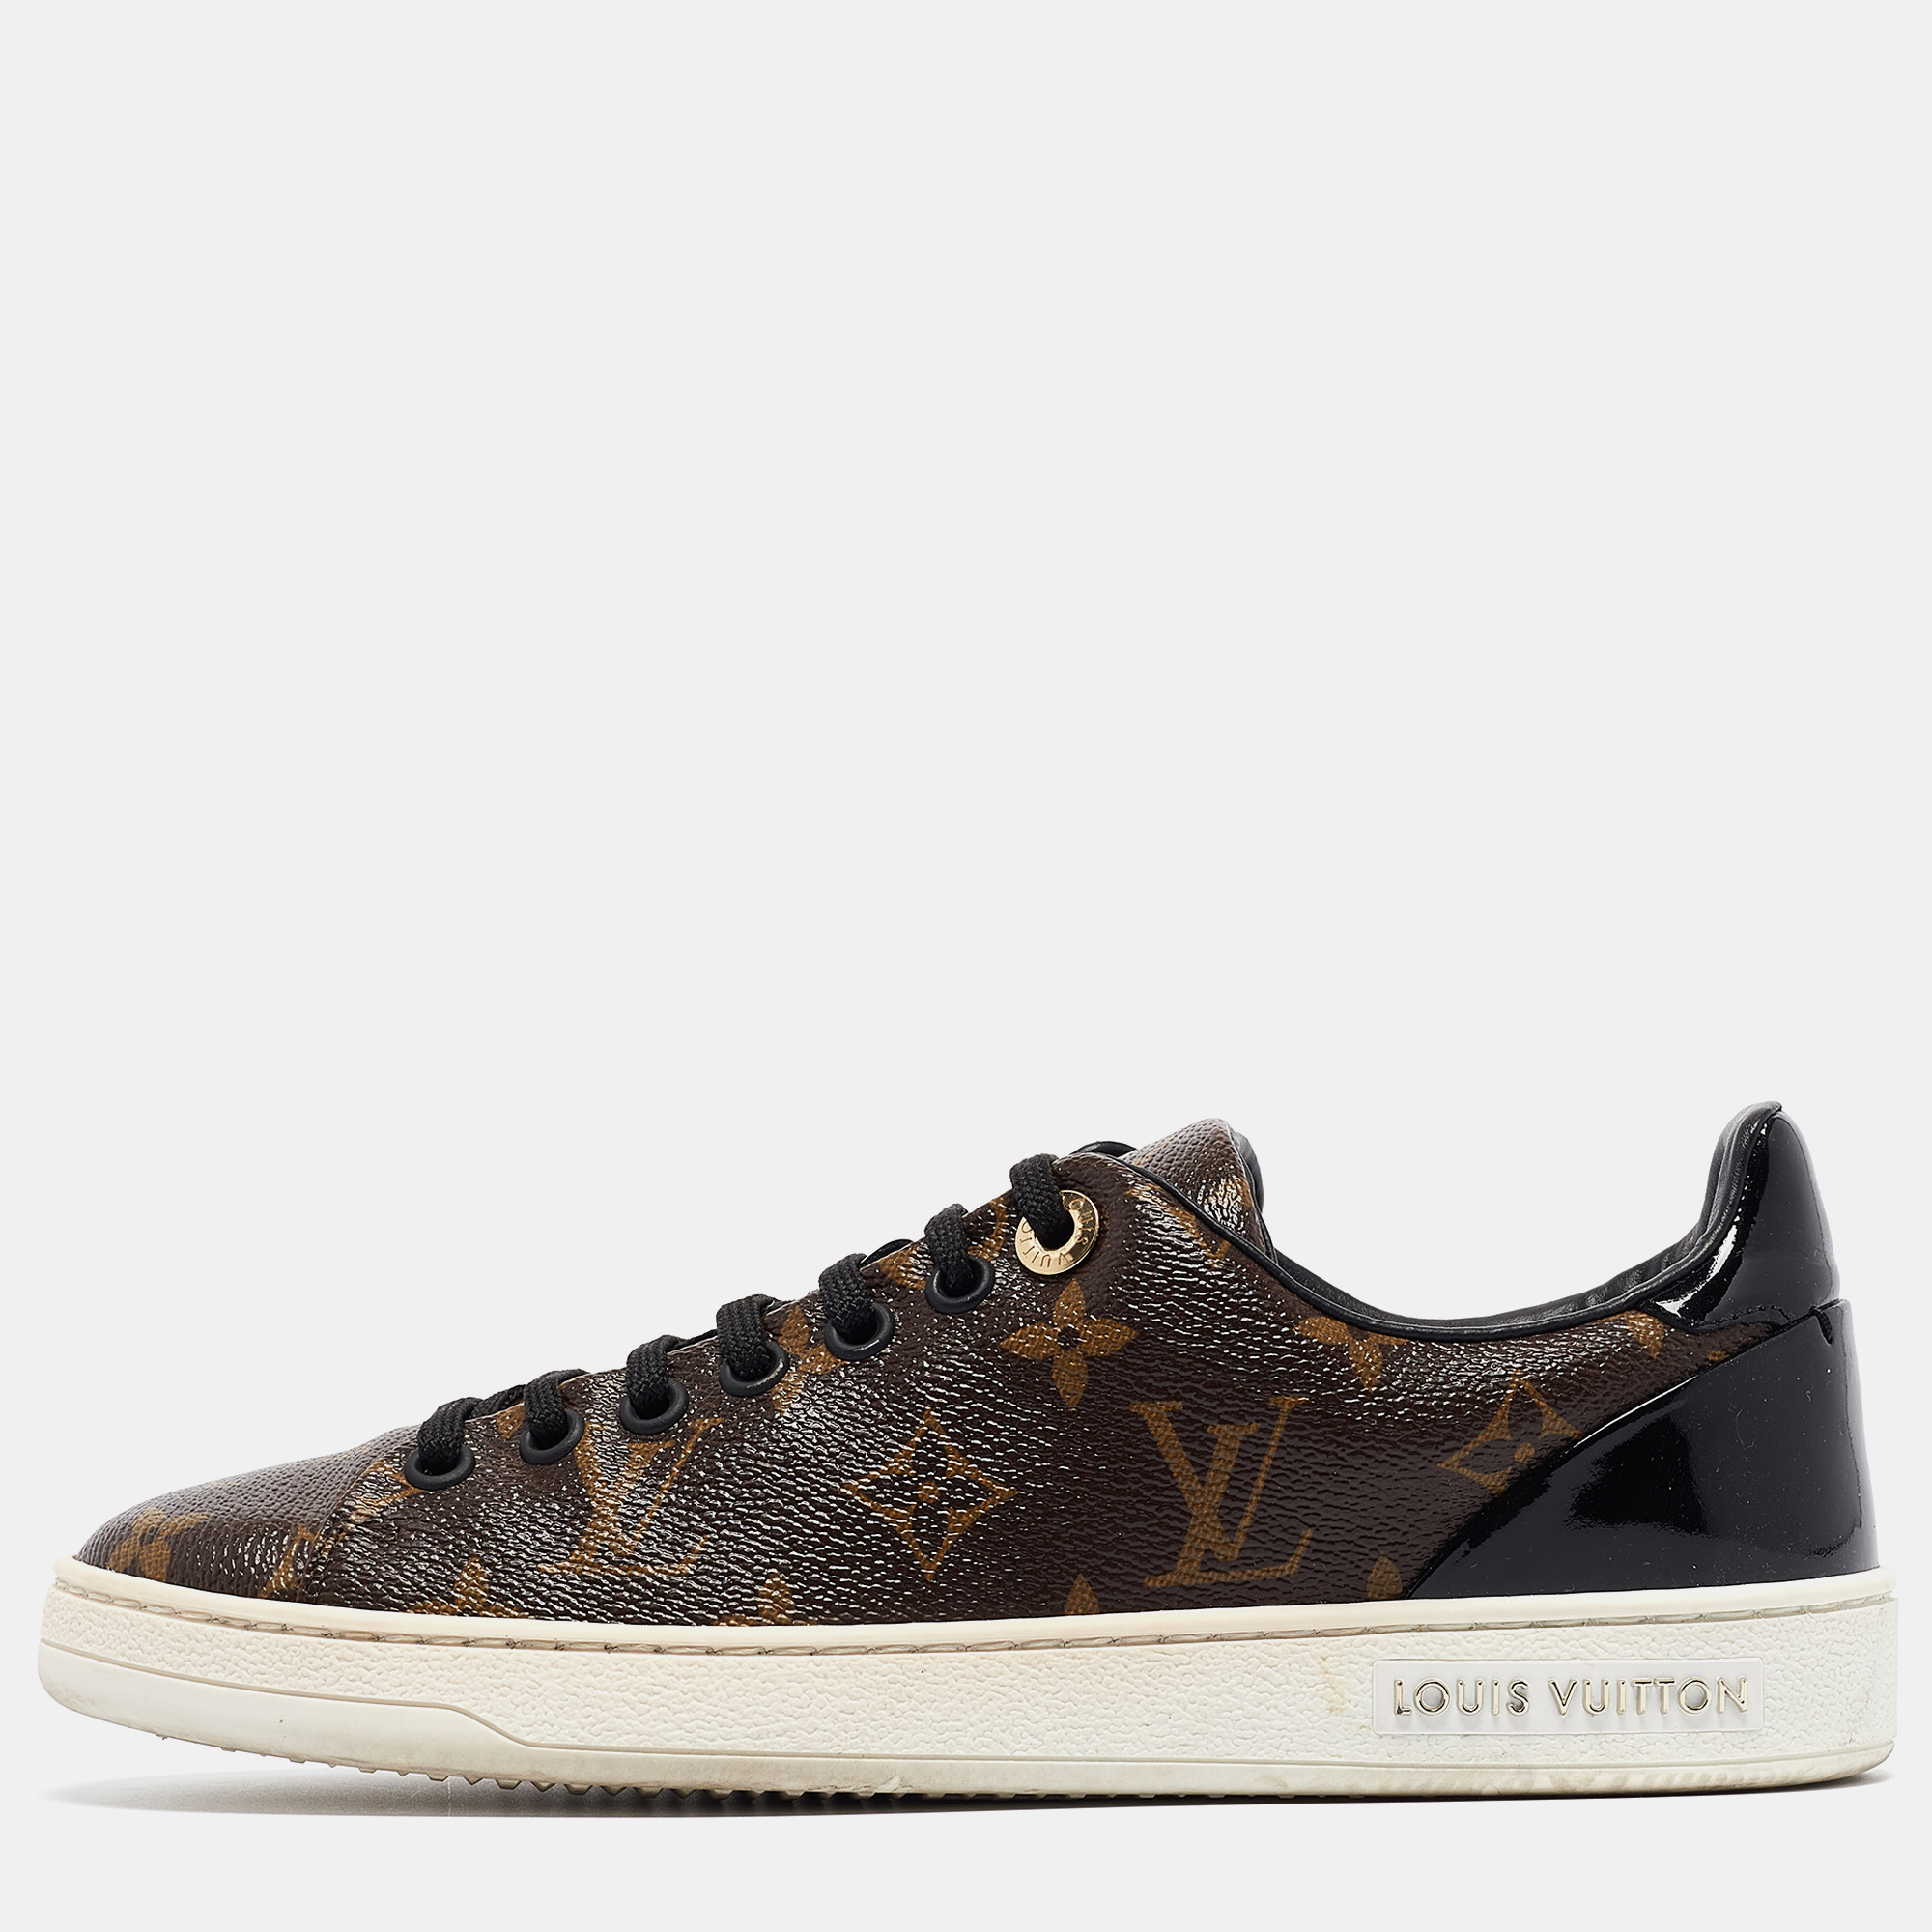 Louis vuitton brown/black monogram canvas and patent frontrow sneakers size 35.5